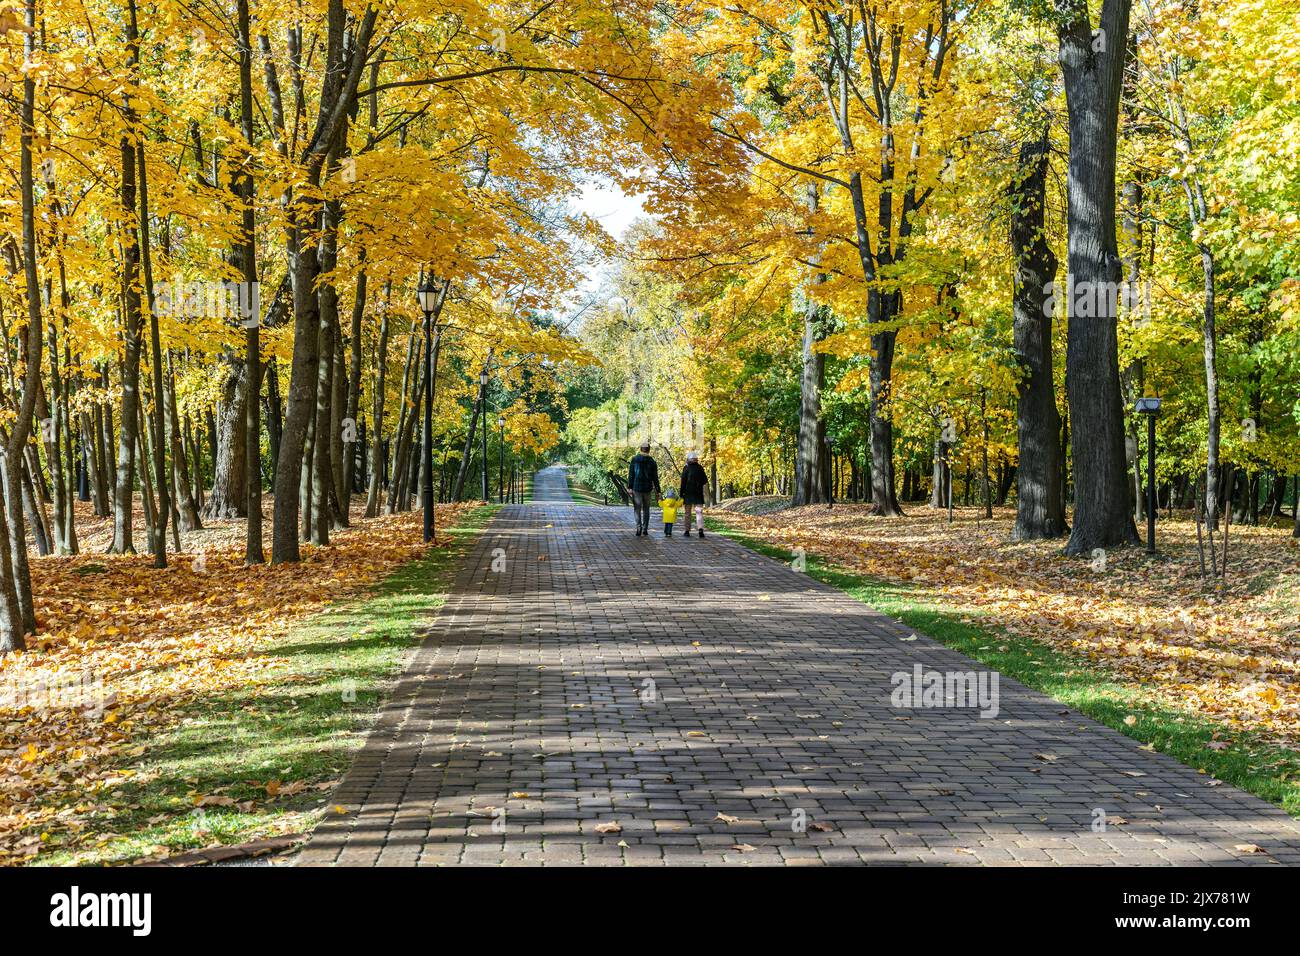 colorful trees and footpath in autumn park landscape Stock Photo